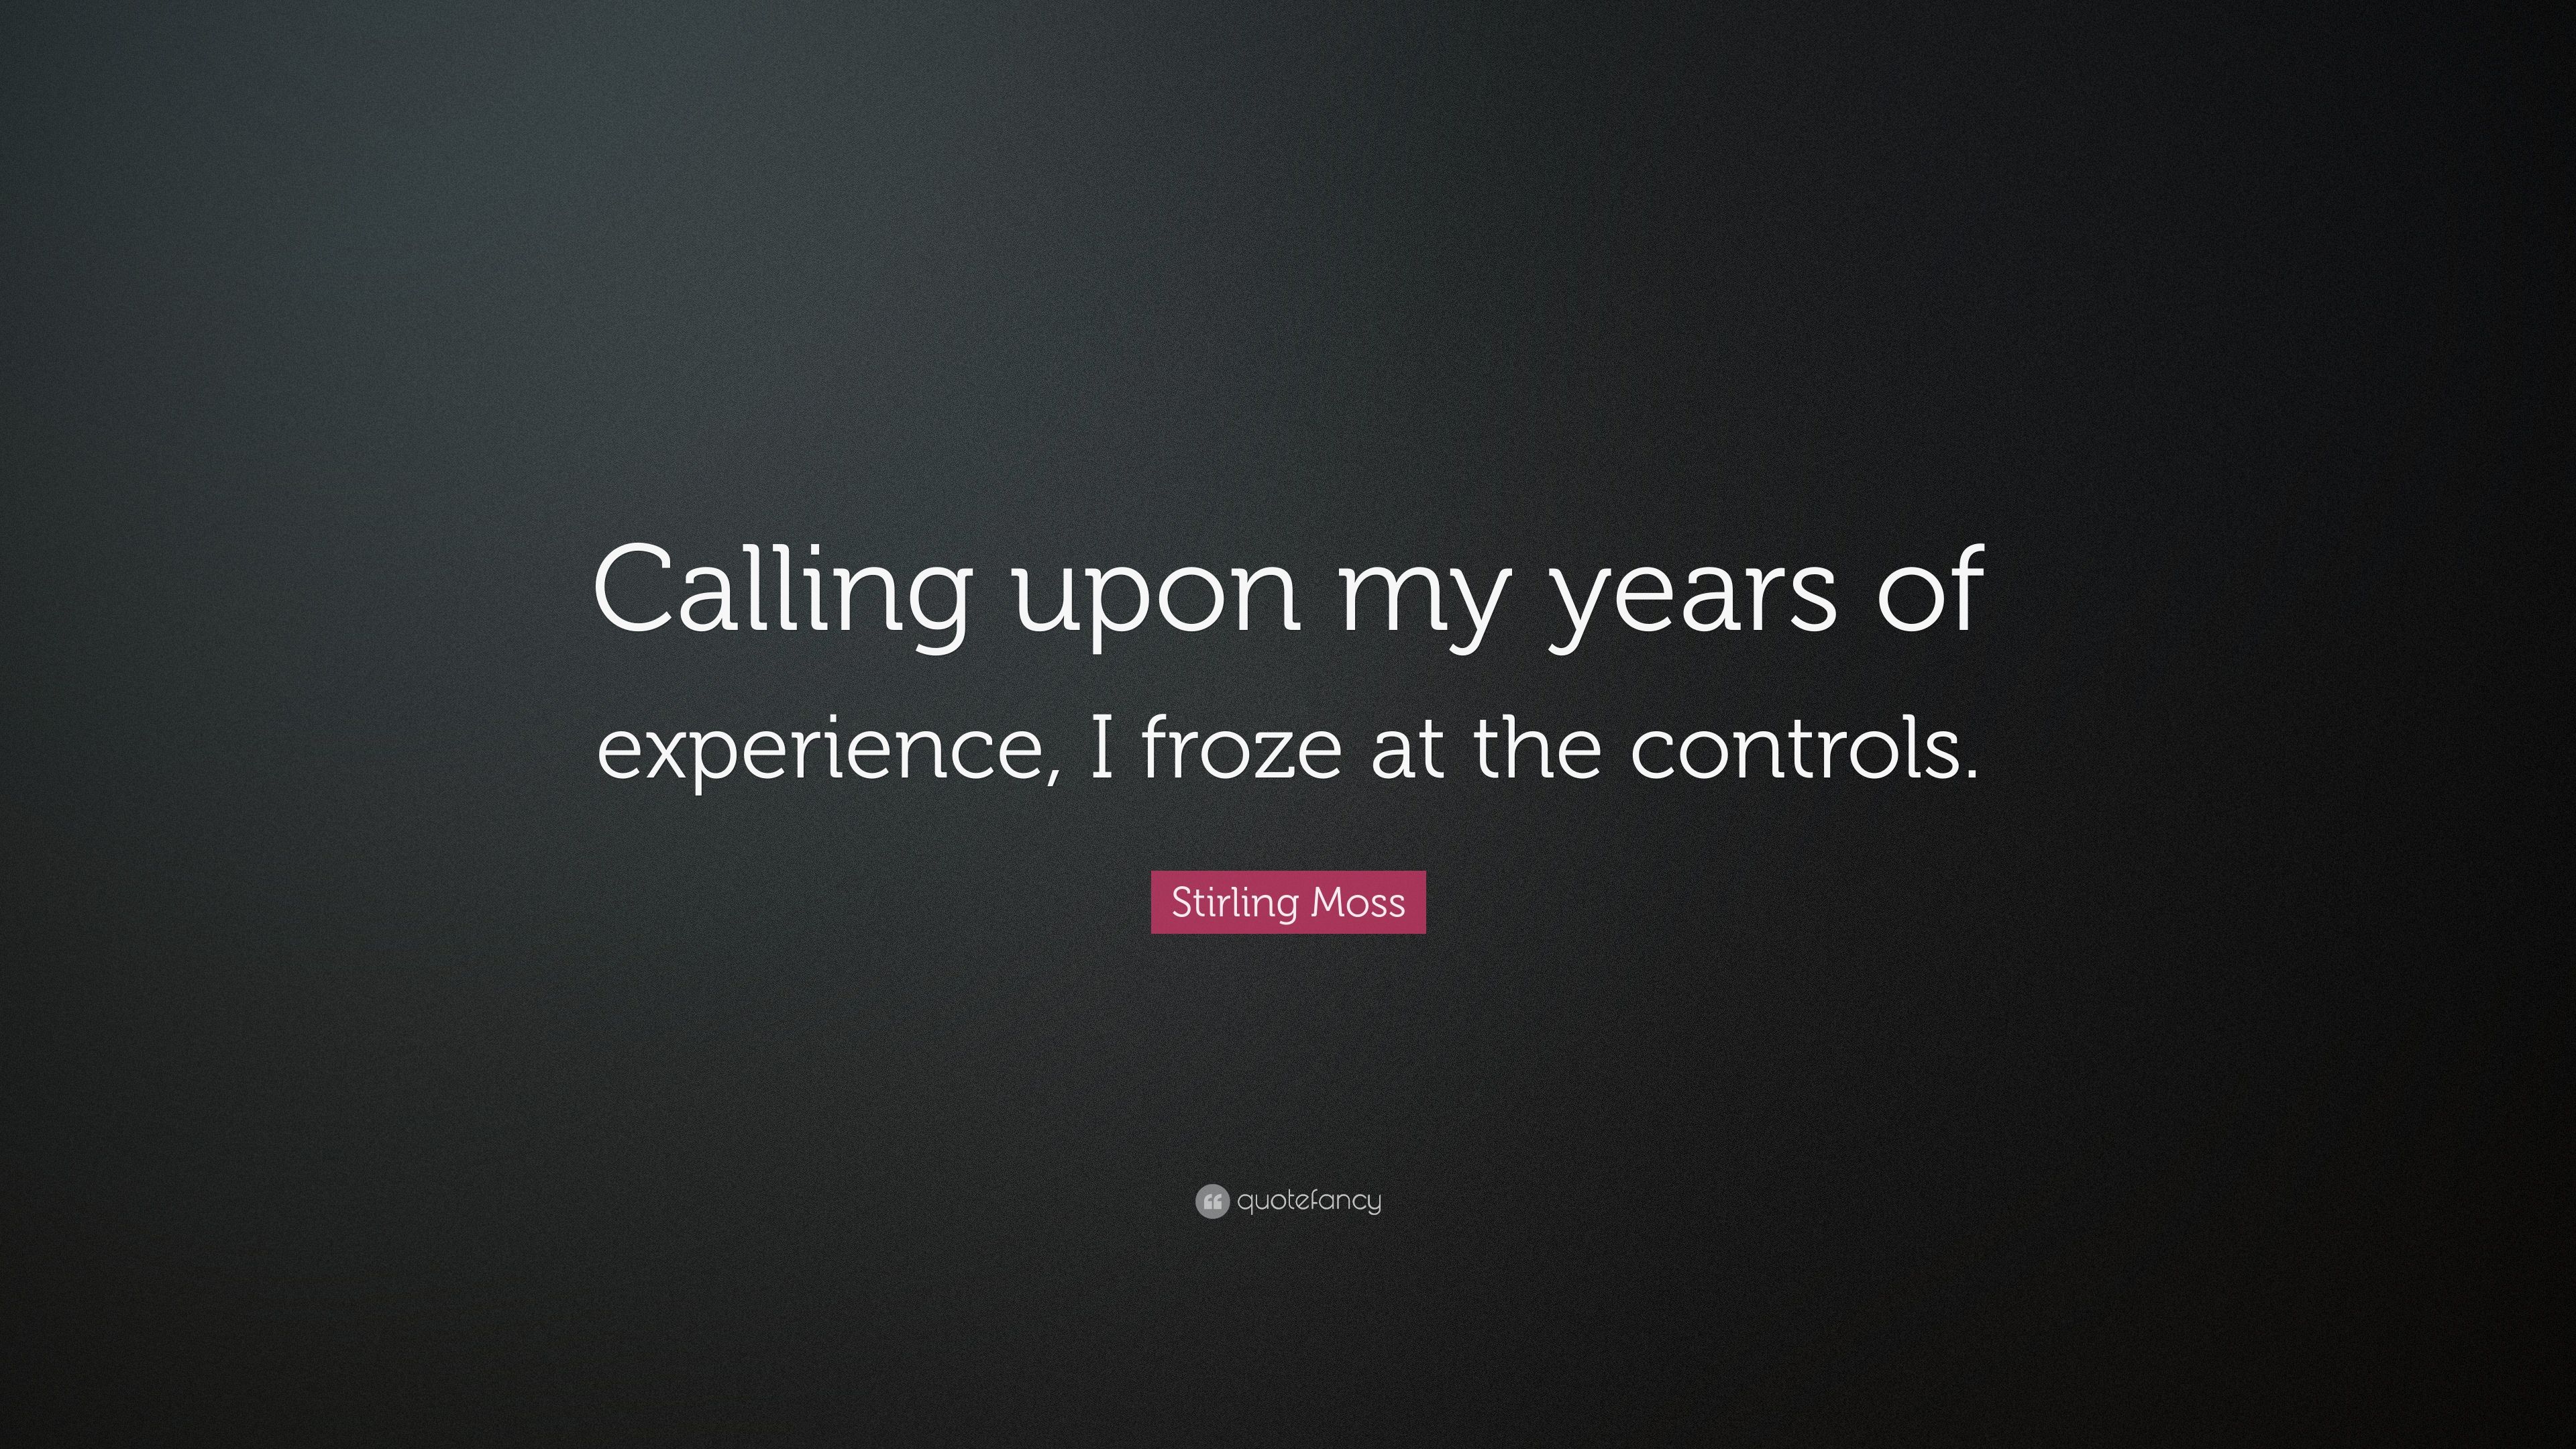 Stirling Moss Quote: “Calling upon my years of experience, I froze at the controls.” (10 wallpaper)